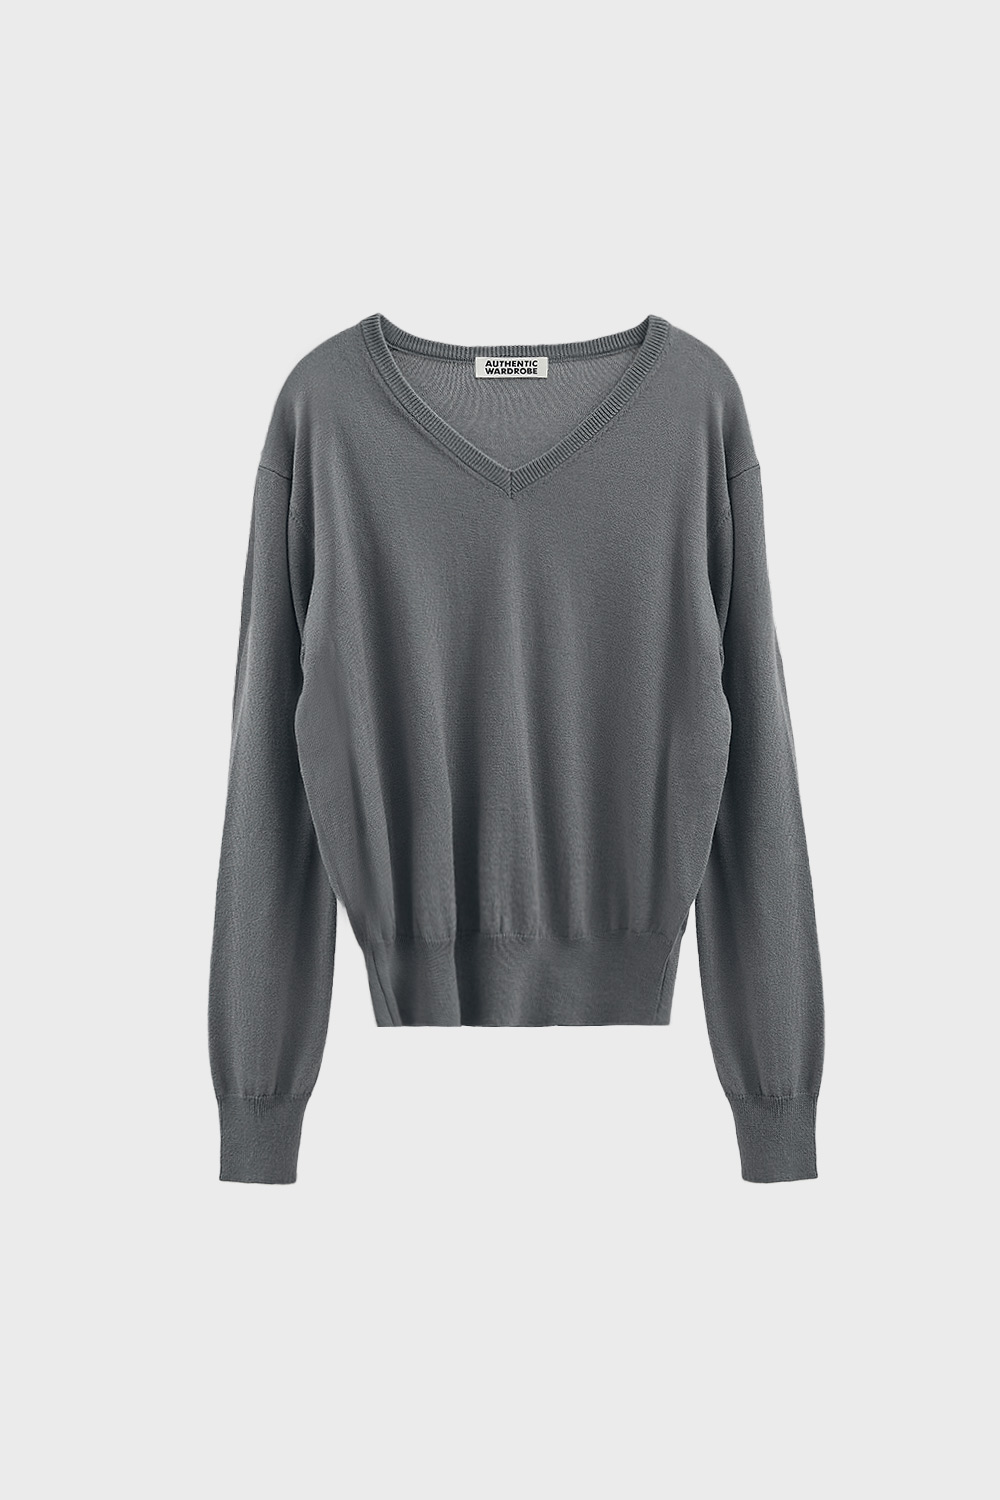 Basic color knit sweater(grey)